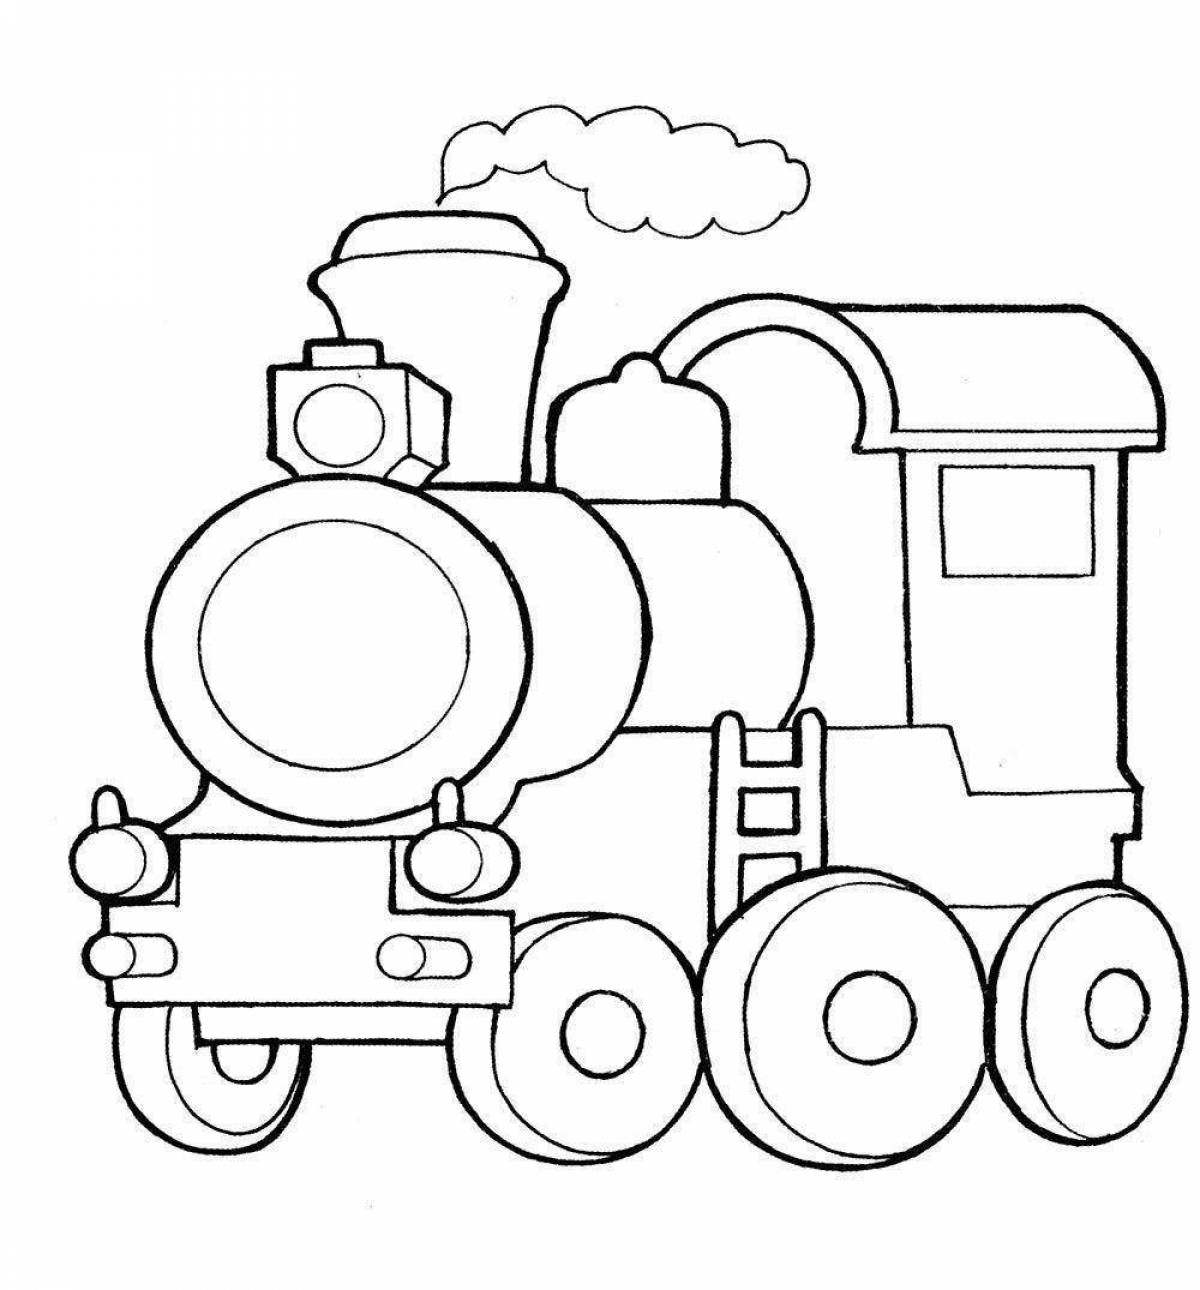 Awesome train coloring page for kids